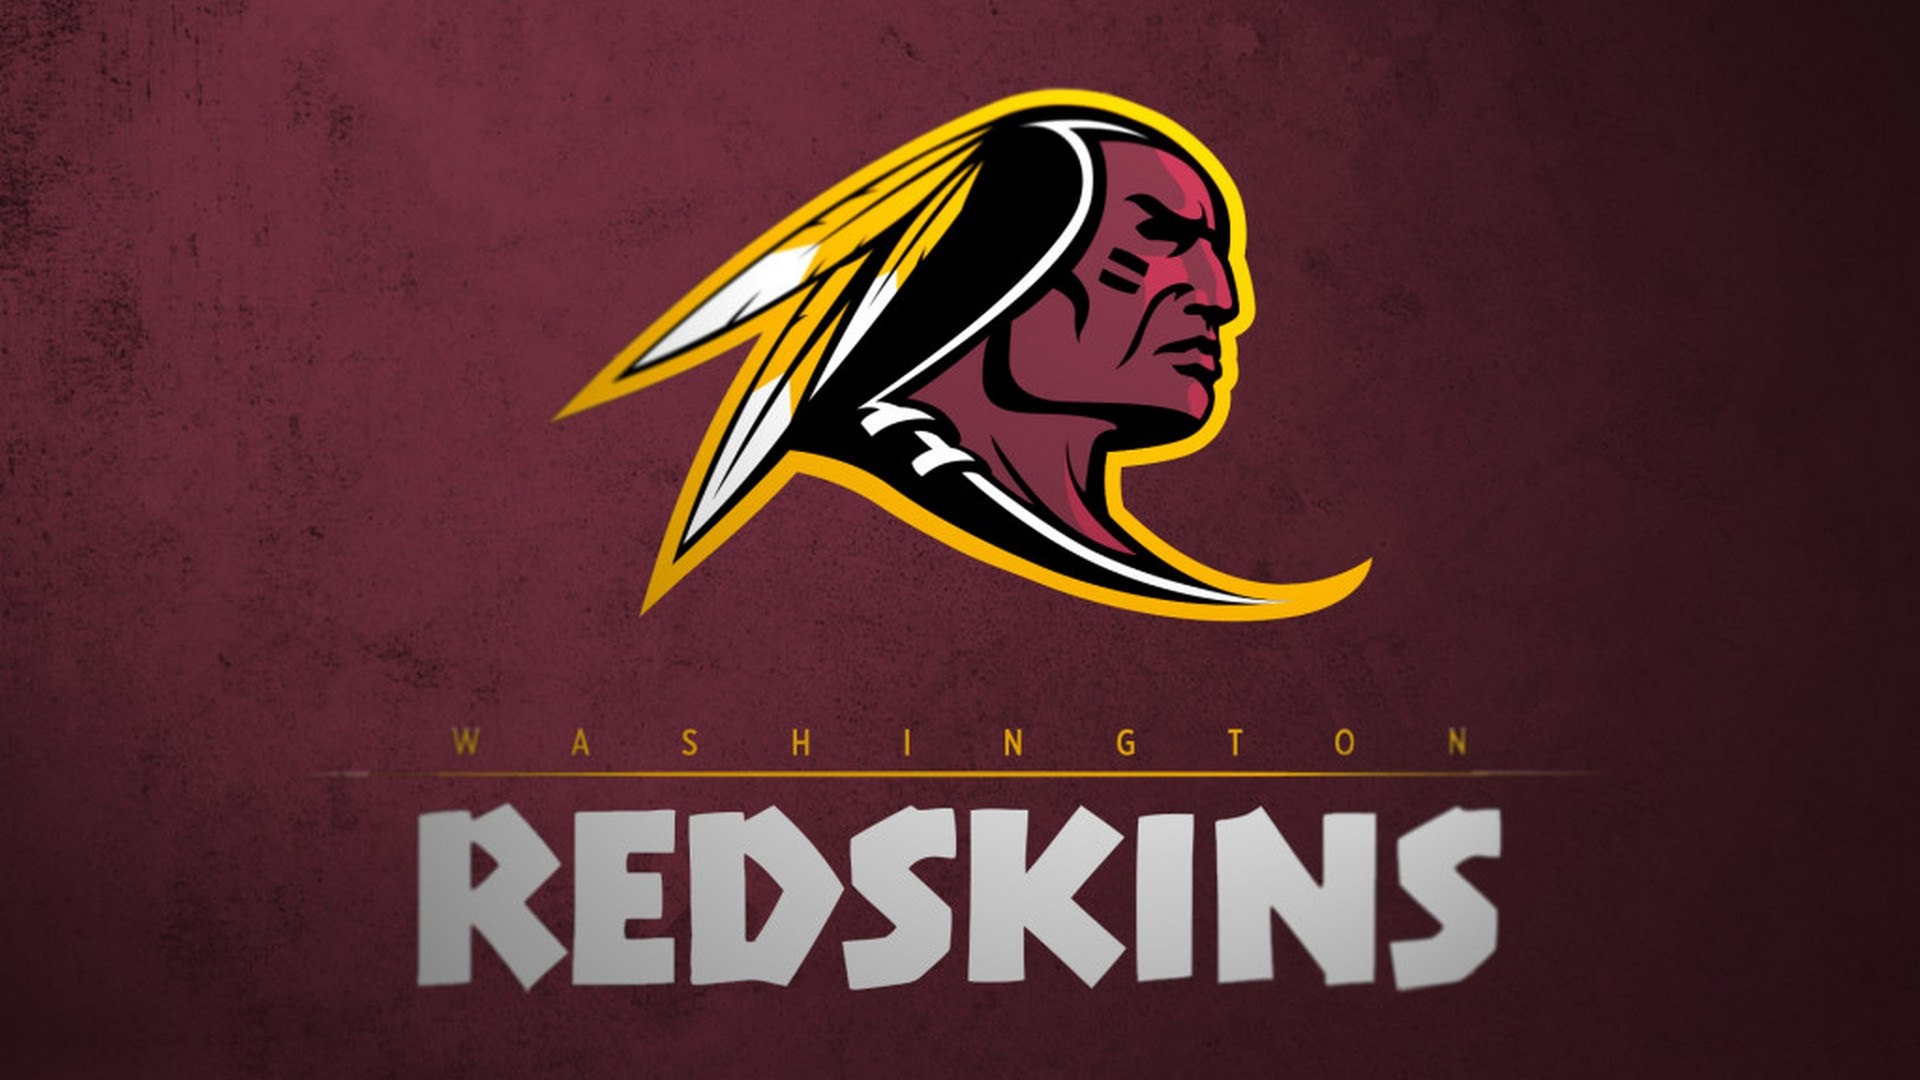 Windows Wallpaper Washington Redskins with high-resolution 1920x1080 pixel. You can use this wallpaper for your Mac or Windows Desktop Background, iPhone, Android or Tablet and another Smartphone device